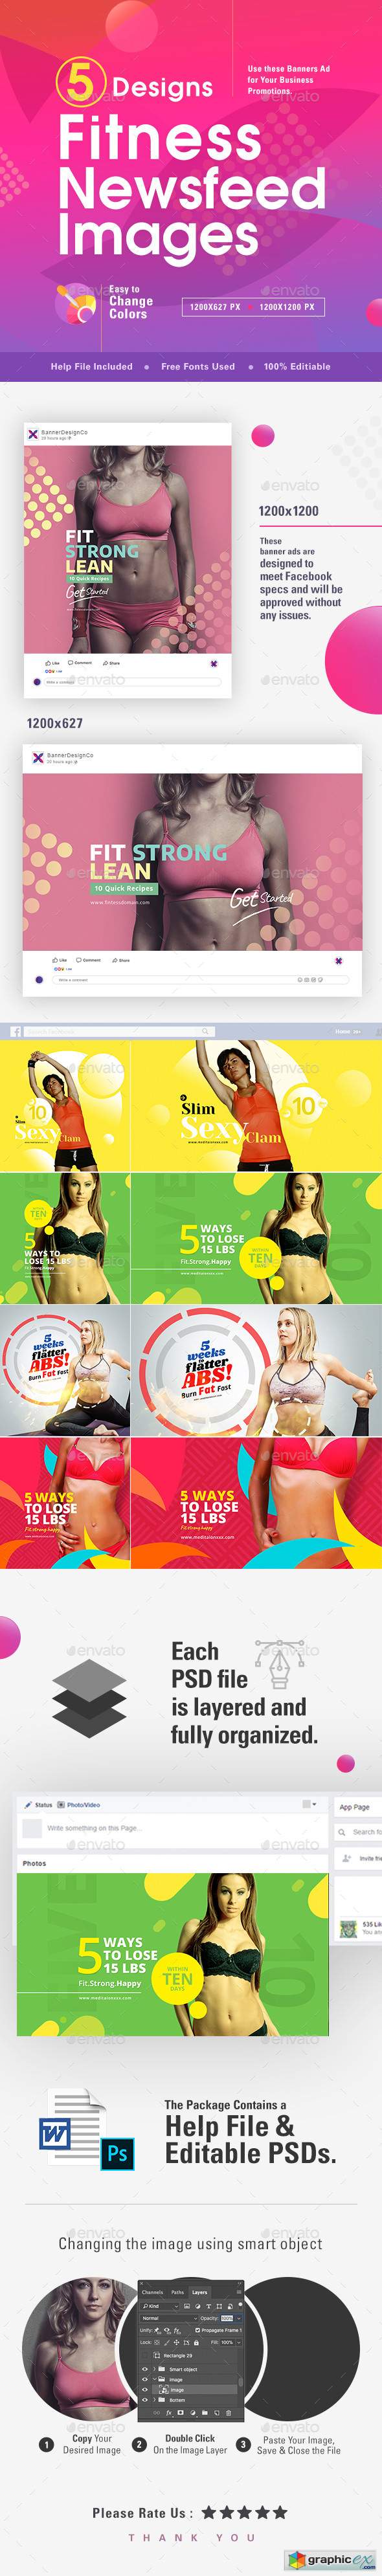 Fitness Social Media Banners - 10 Designs